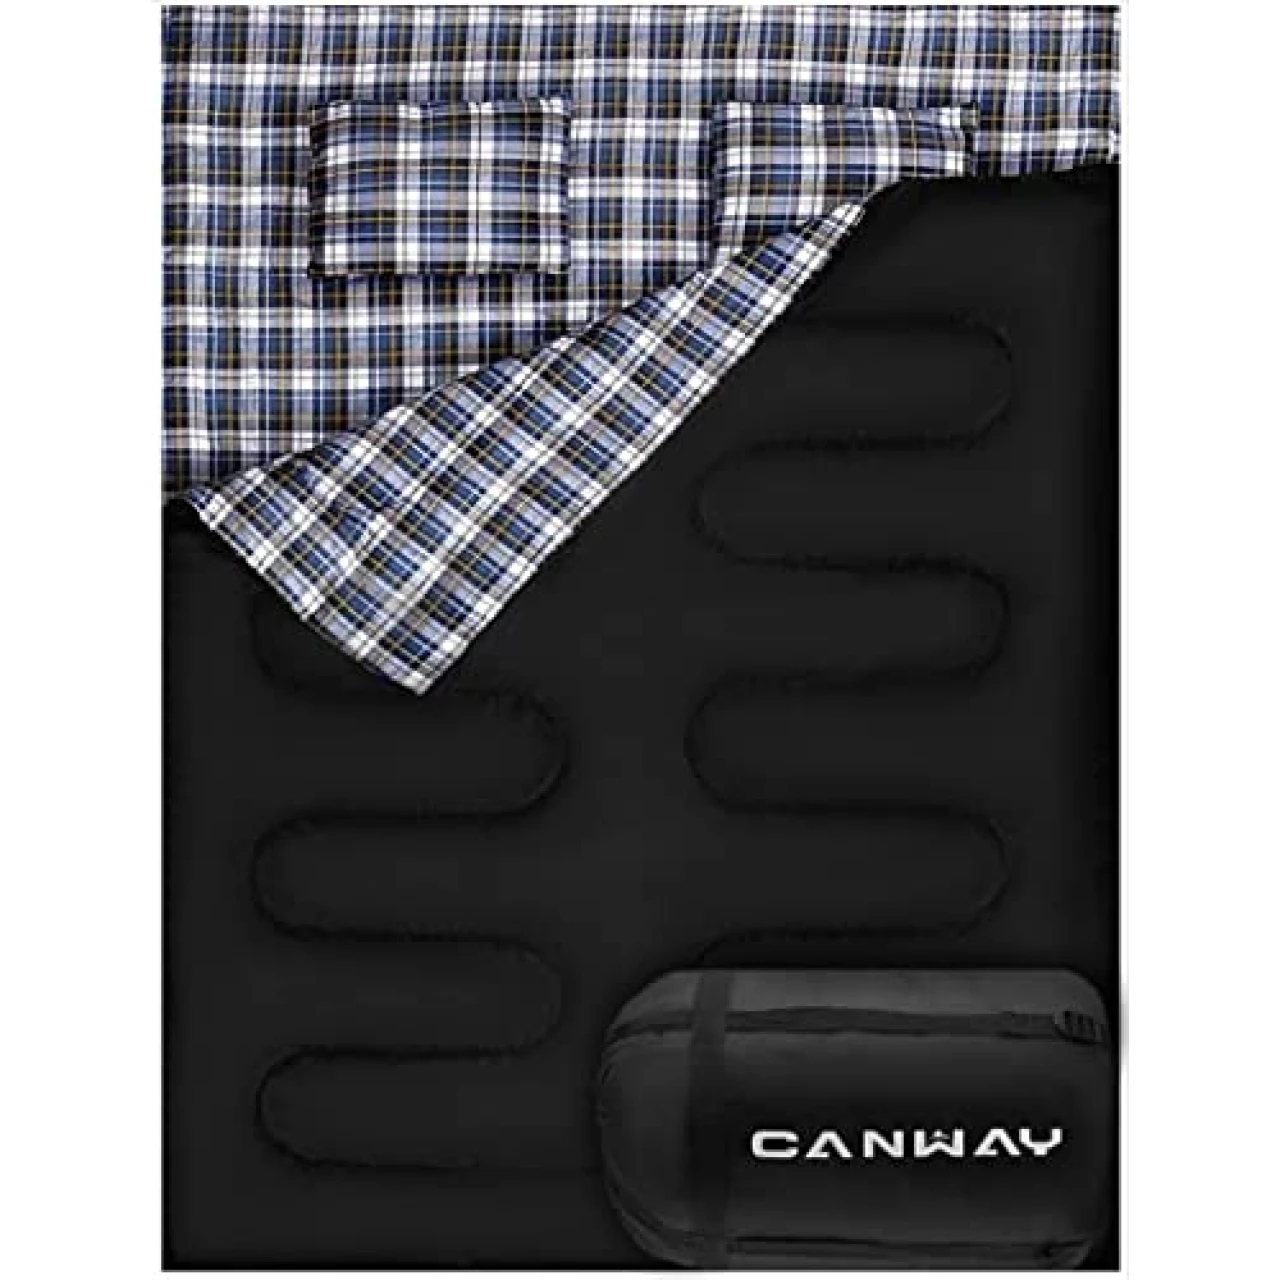 Canway Double Sleeping Bag, Flannel Lightweight Waterproof 2 Person Sleeping Bag with 2 Pillows